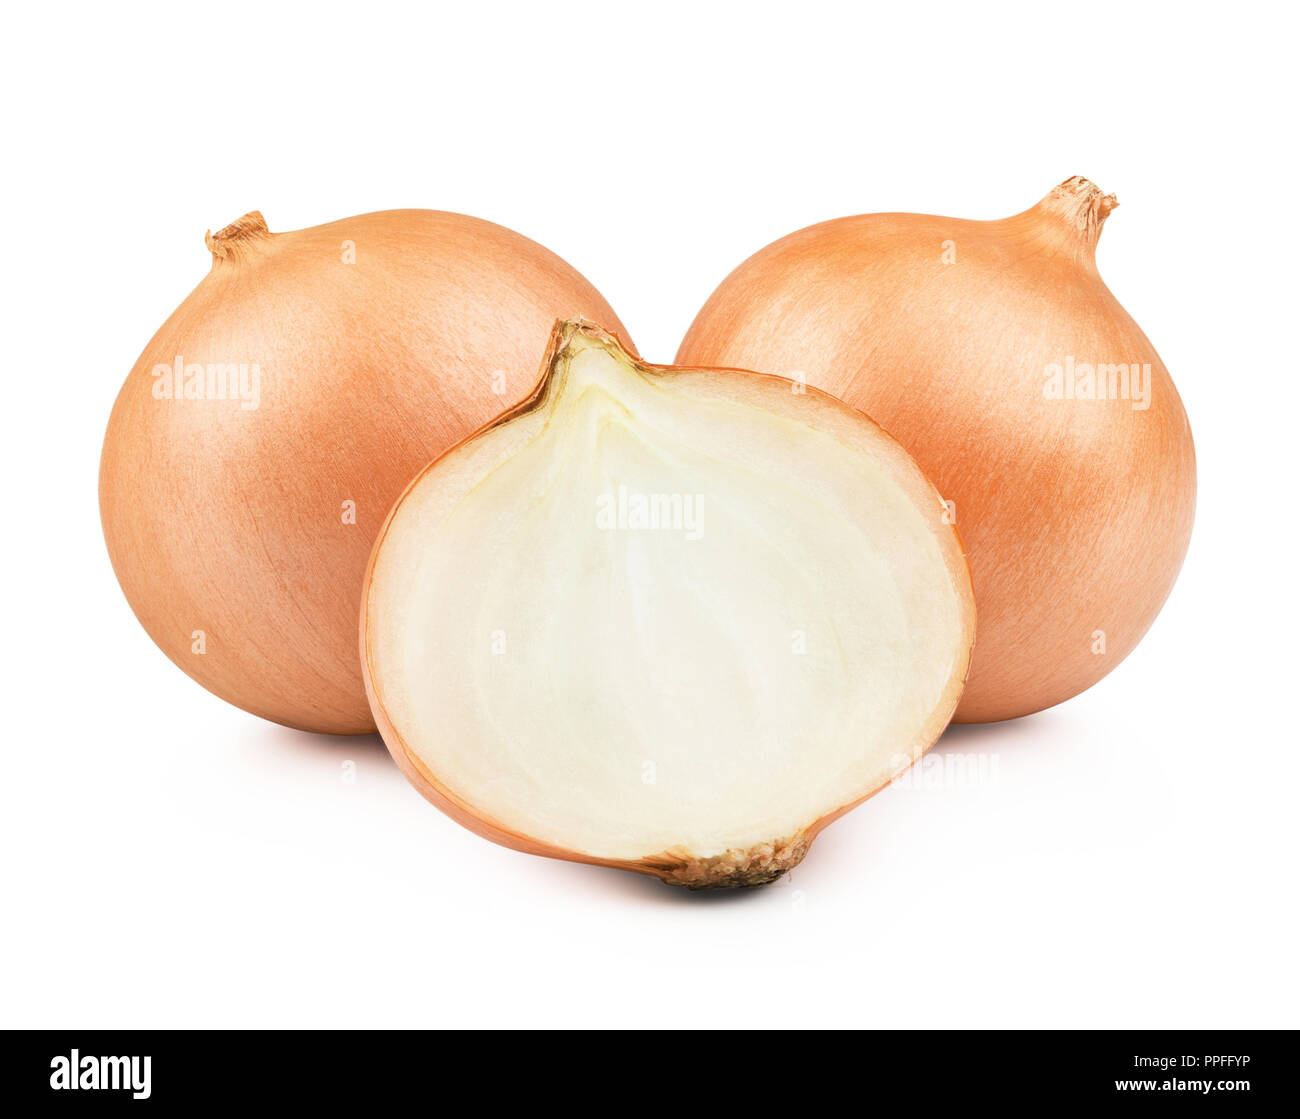 Onion sliced bulbs isolated on white background Stock Photo